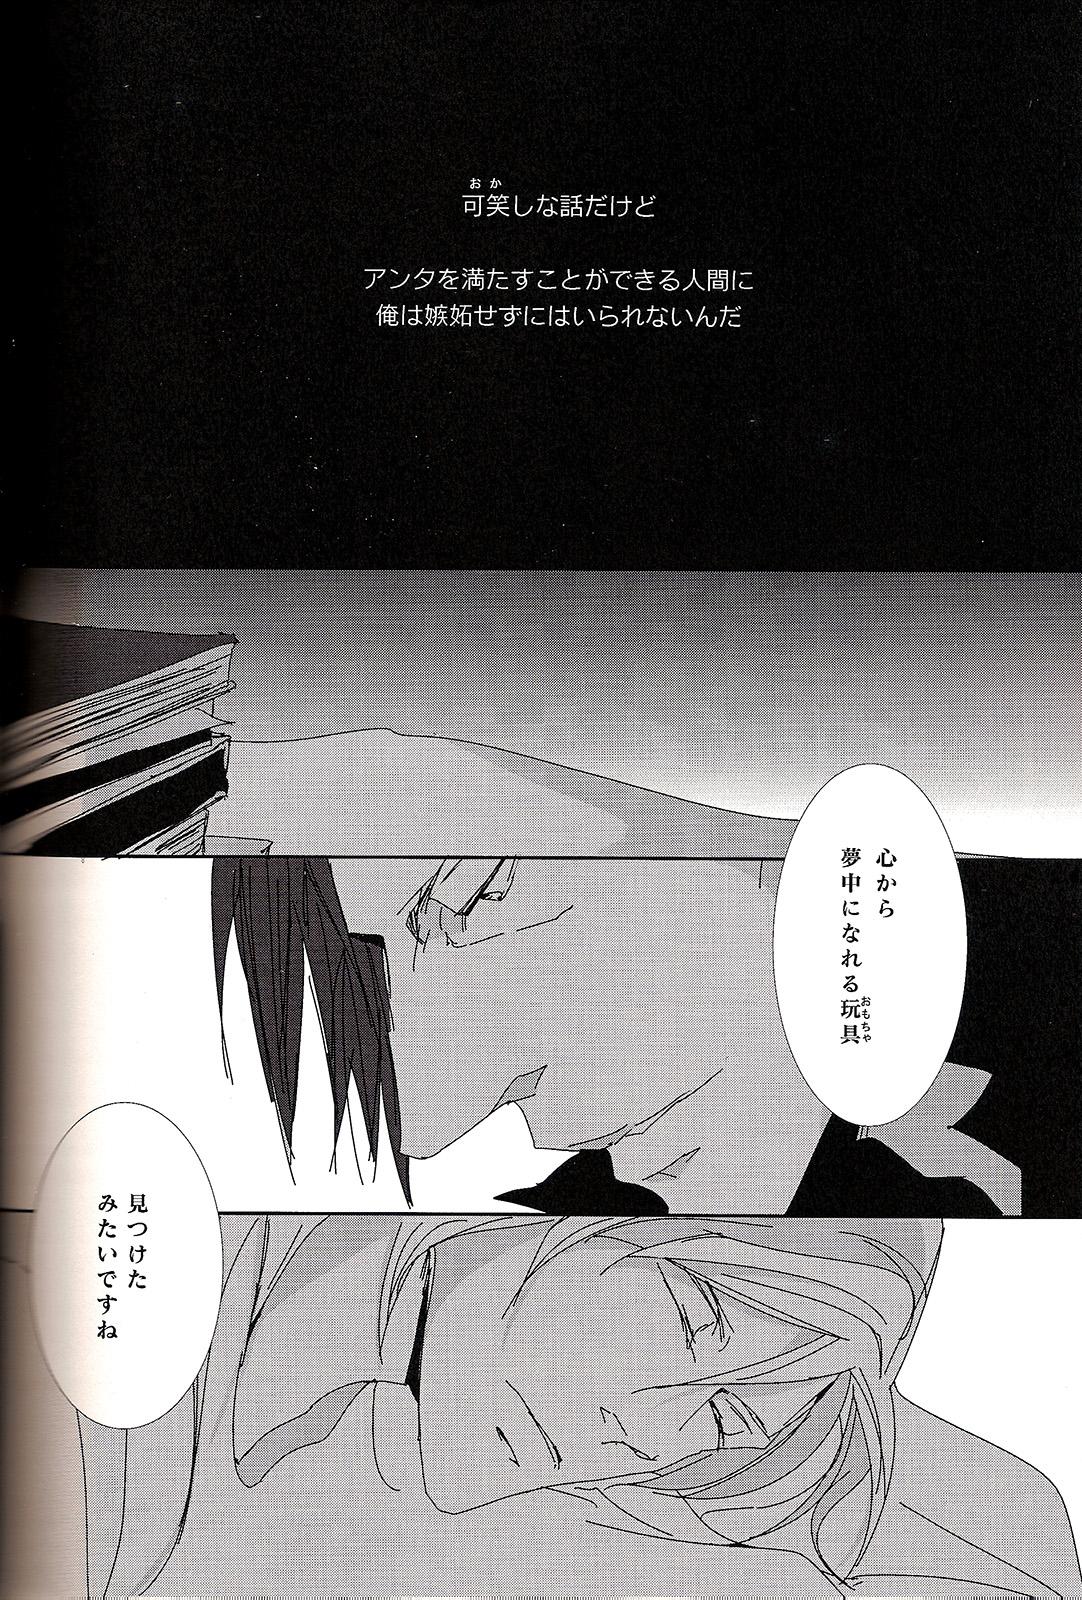 Tgirls Sweet or Spicy - Psycho-pass Spycam - Page 20